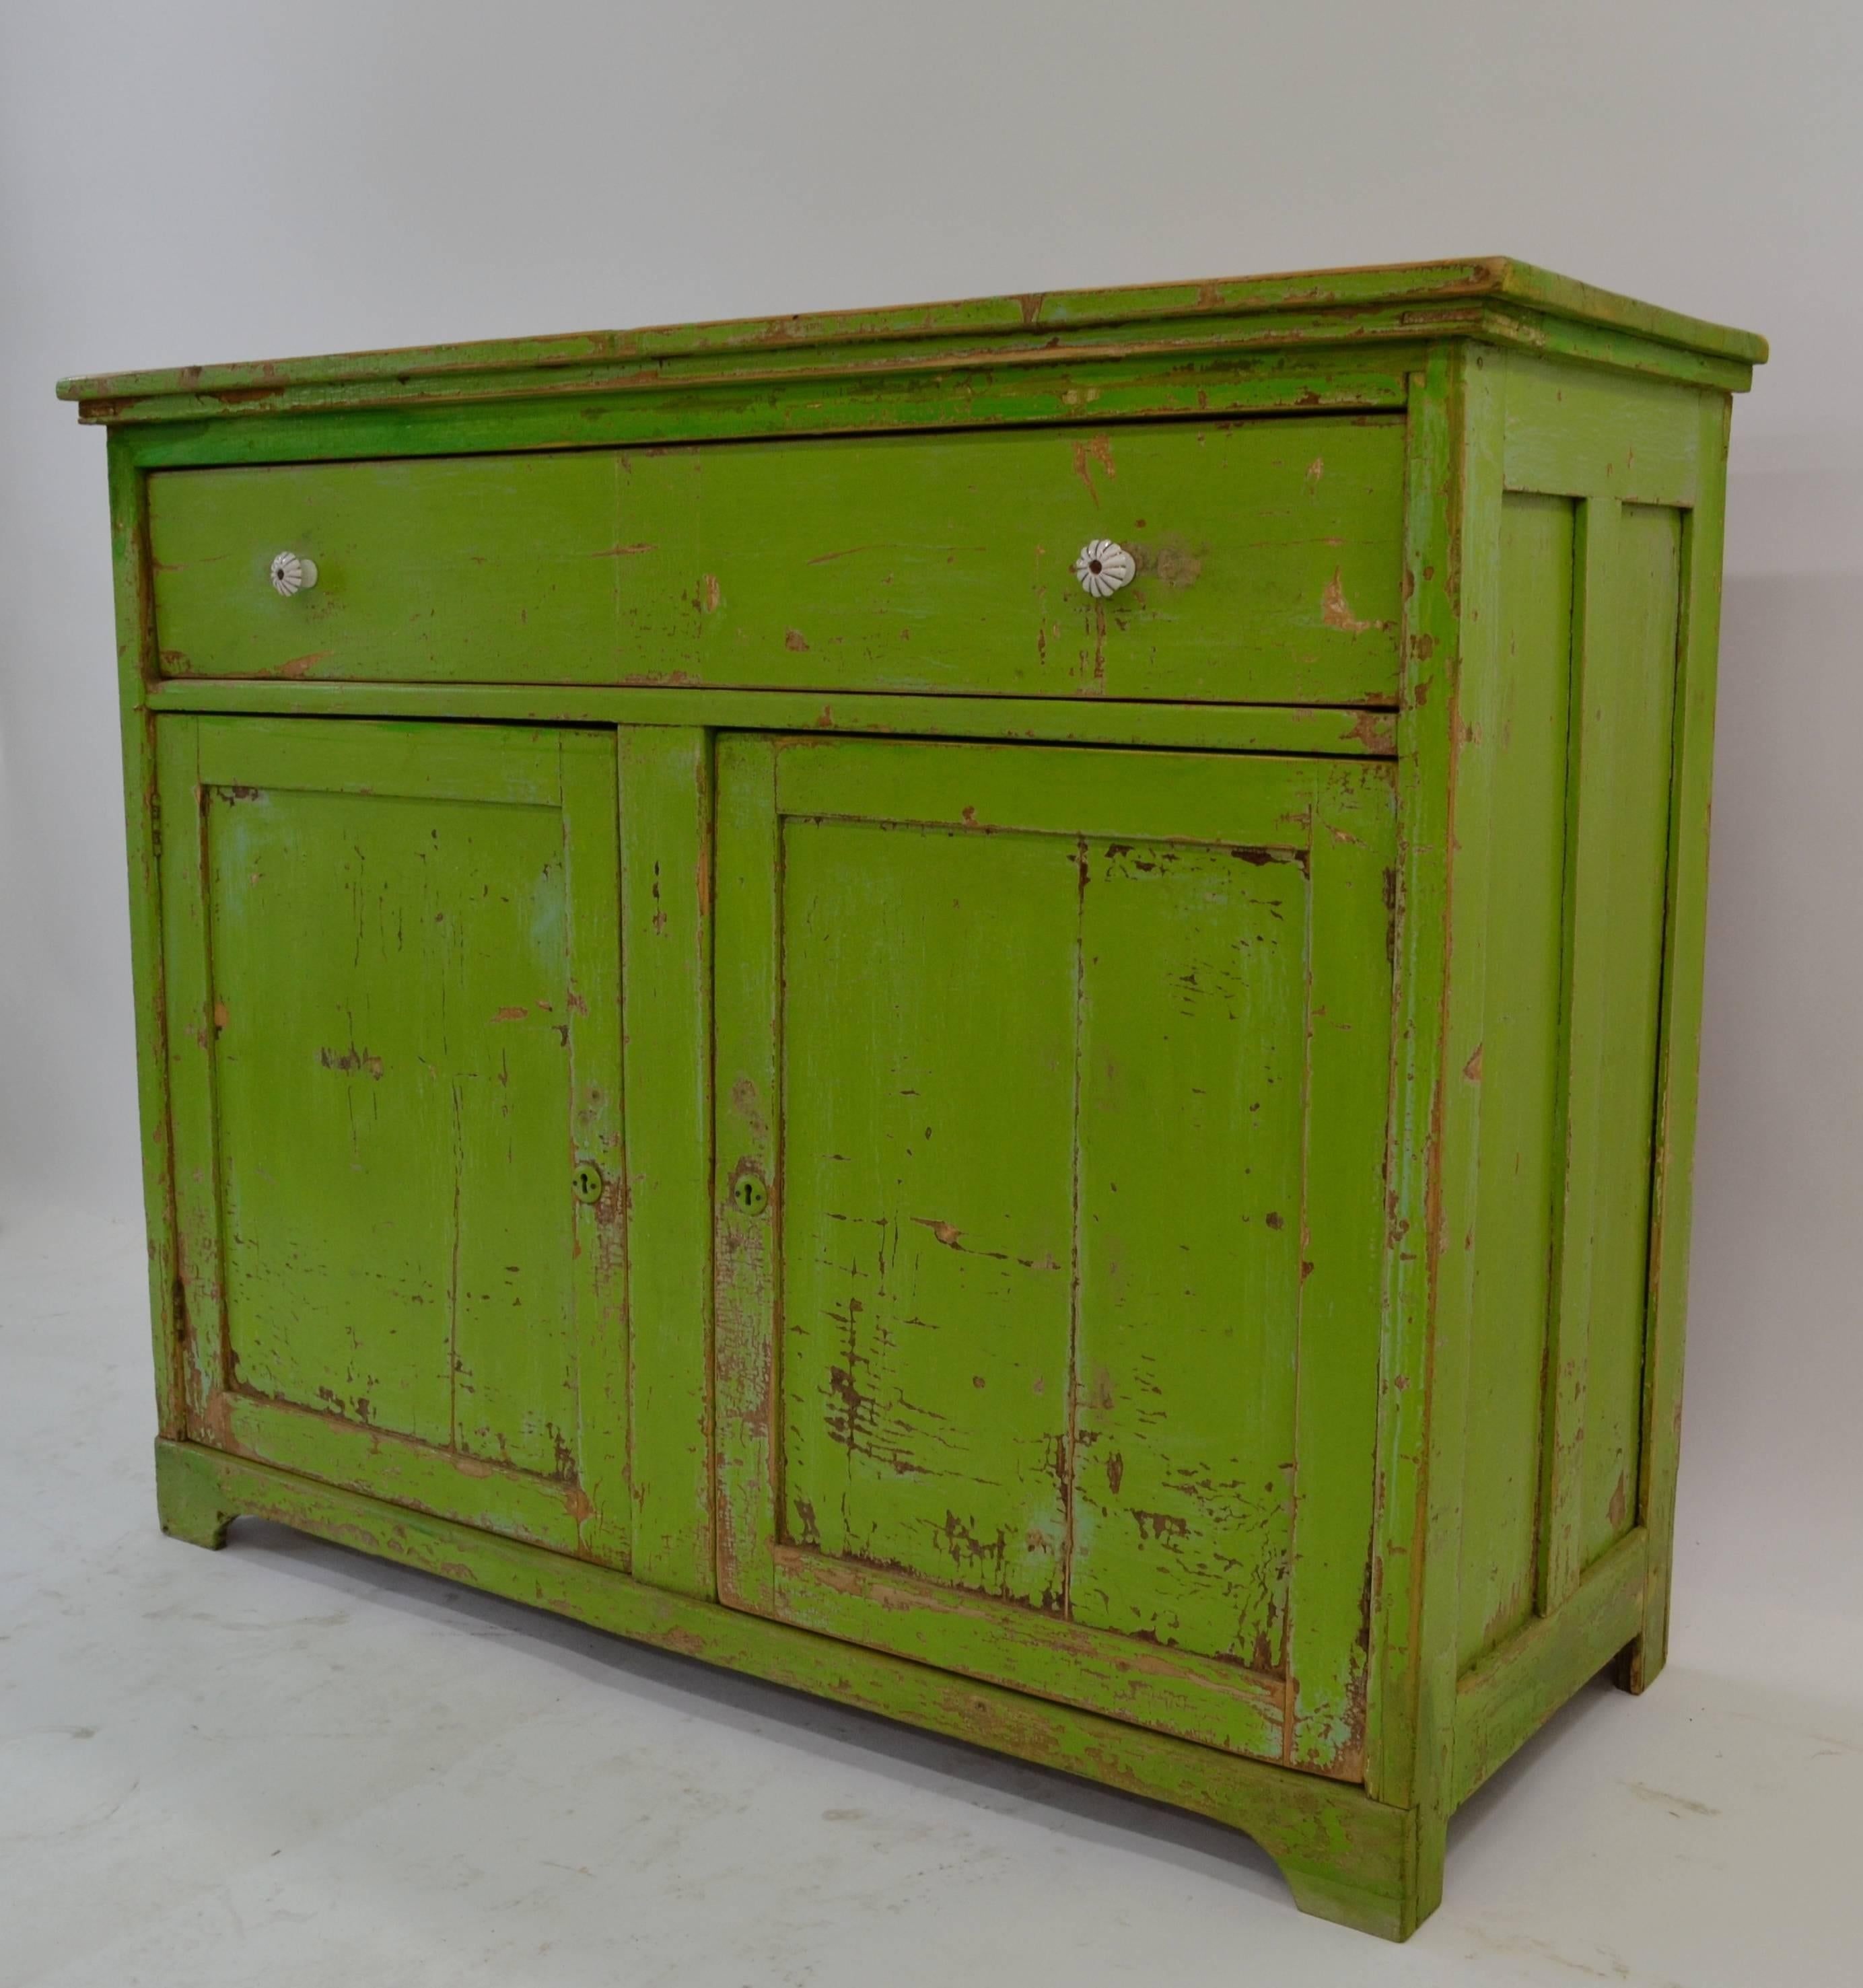 A splendid piece of plain country furniture, this large dresser base with paneled sides features a single deep full span dovetailed drawer above two paneled doors separated by a central stile. The interior has a single original shelf. In shades of